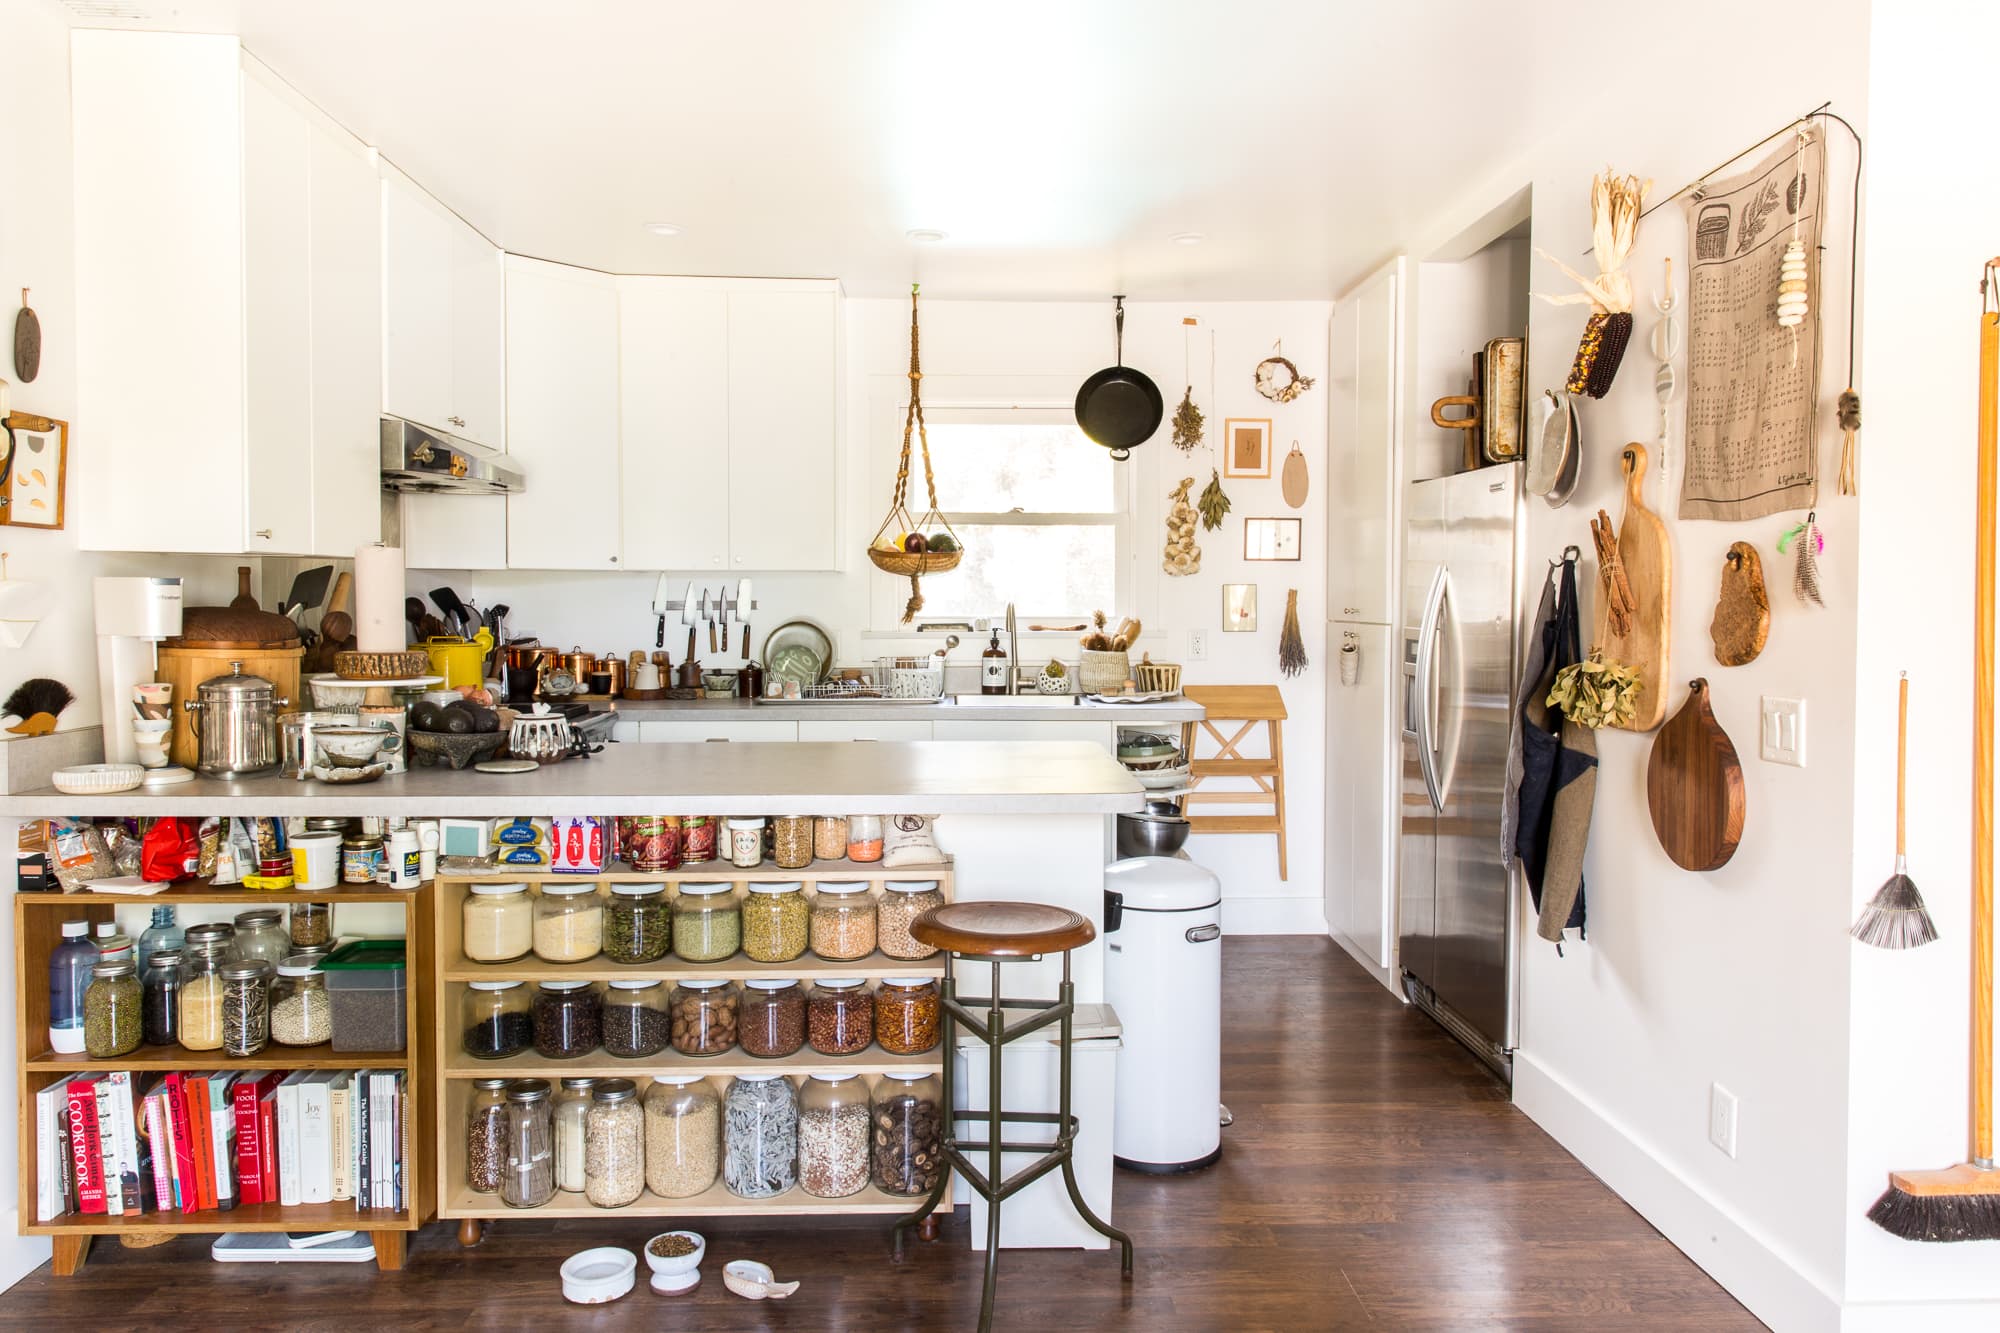 The 10 Best Organizing Tips From Season 2 of “Get Organized with the Home  Edit”